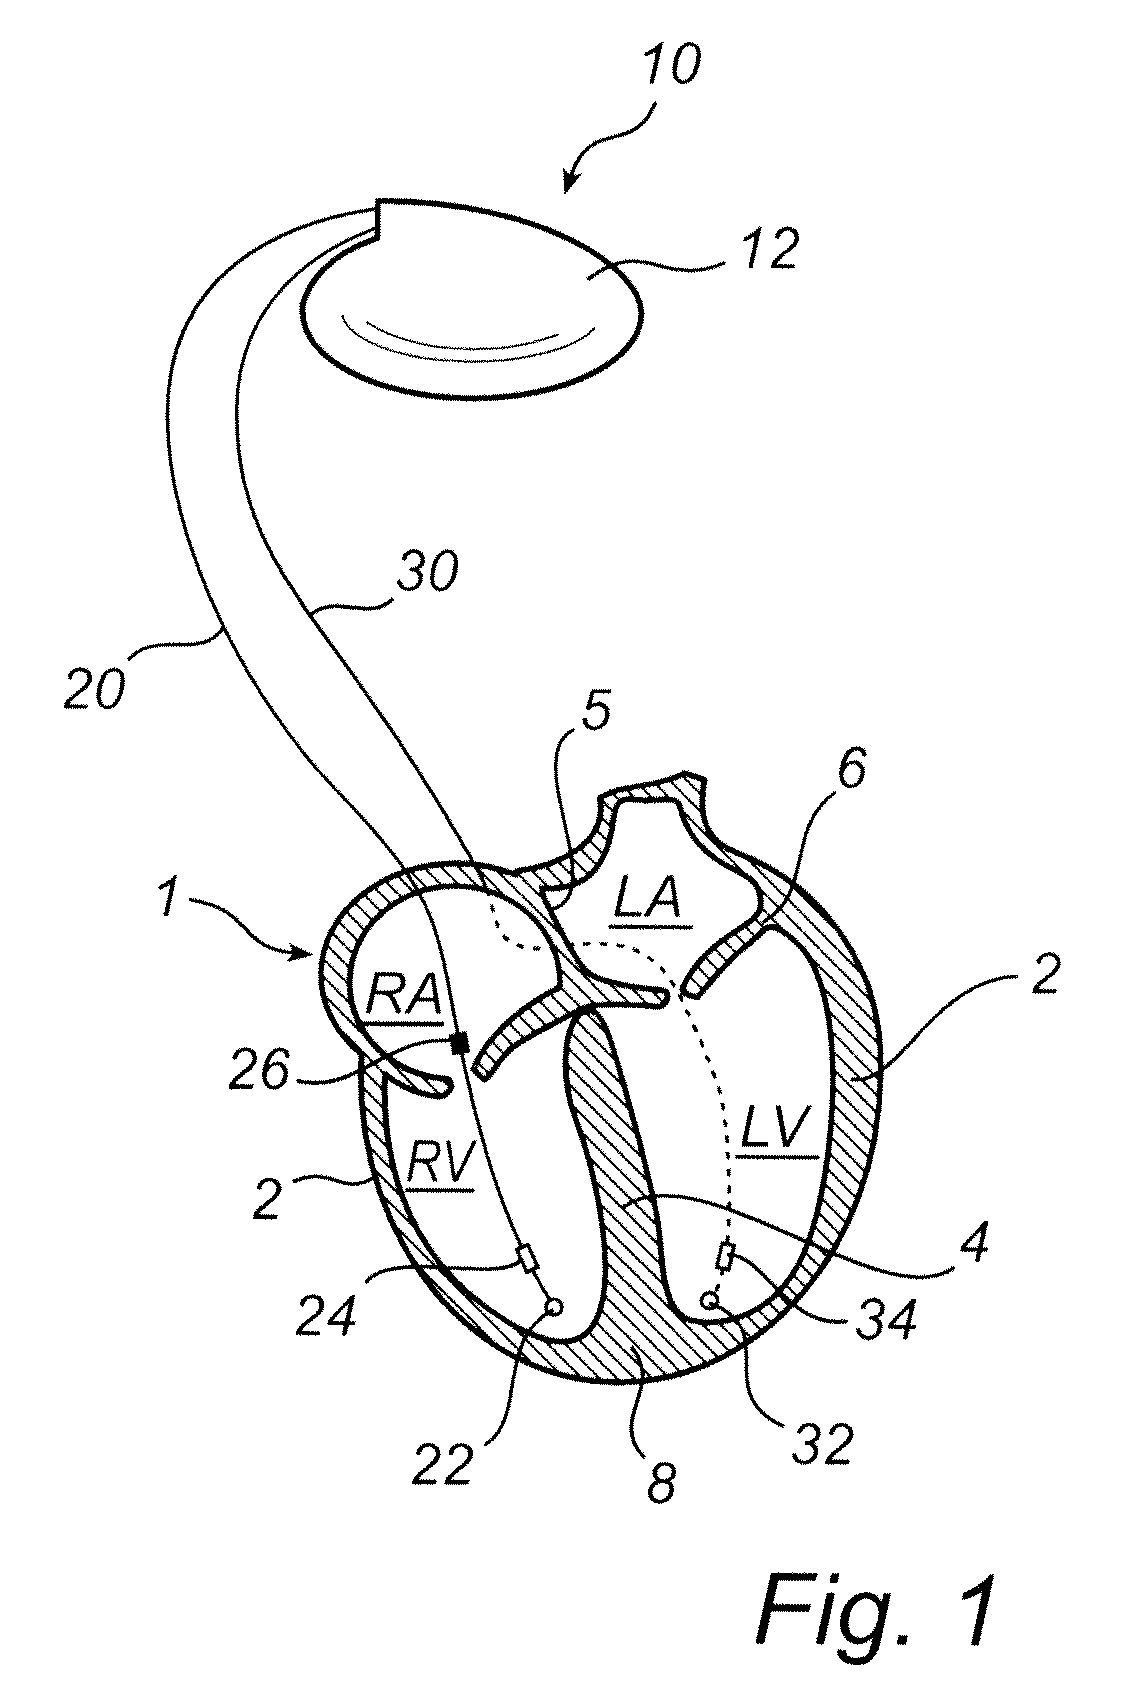 Implantable medical device and method for classifying arrhythmia events